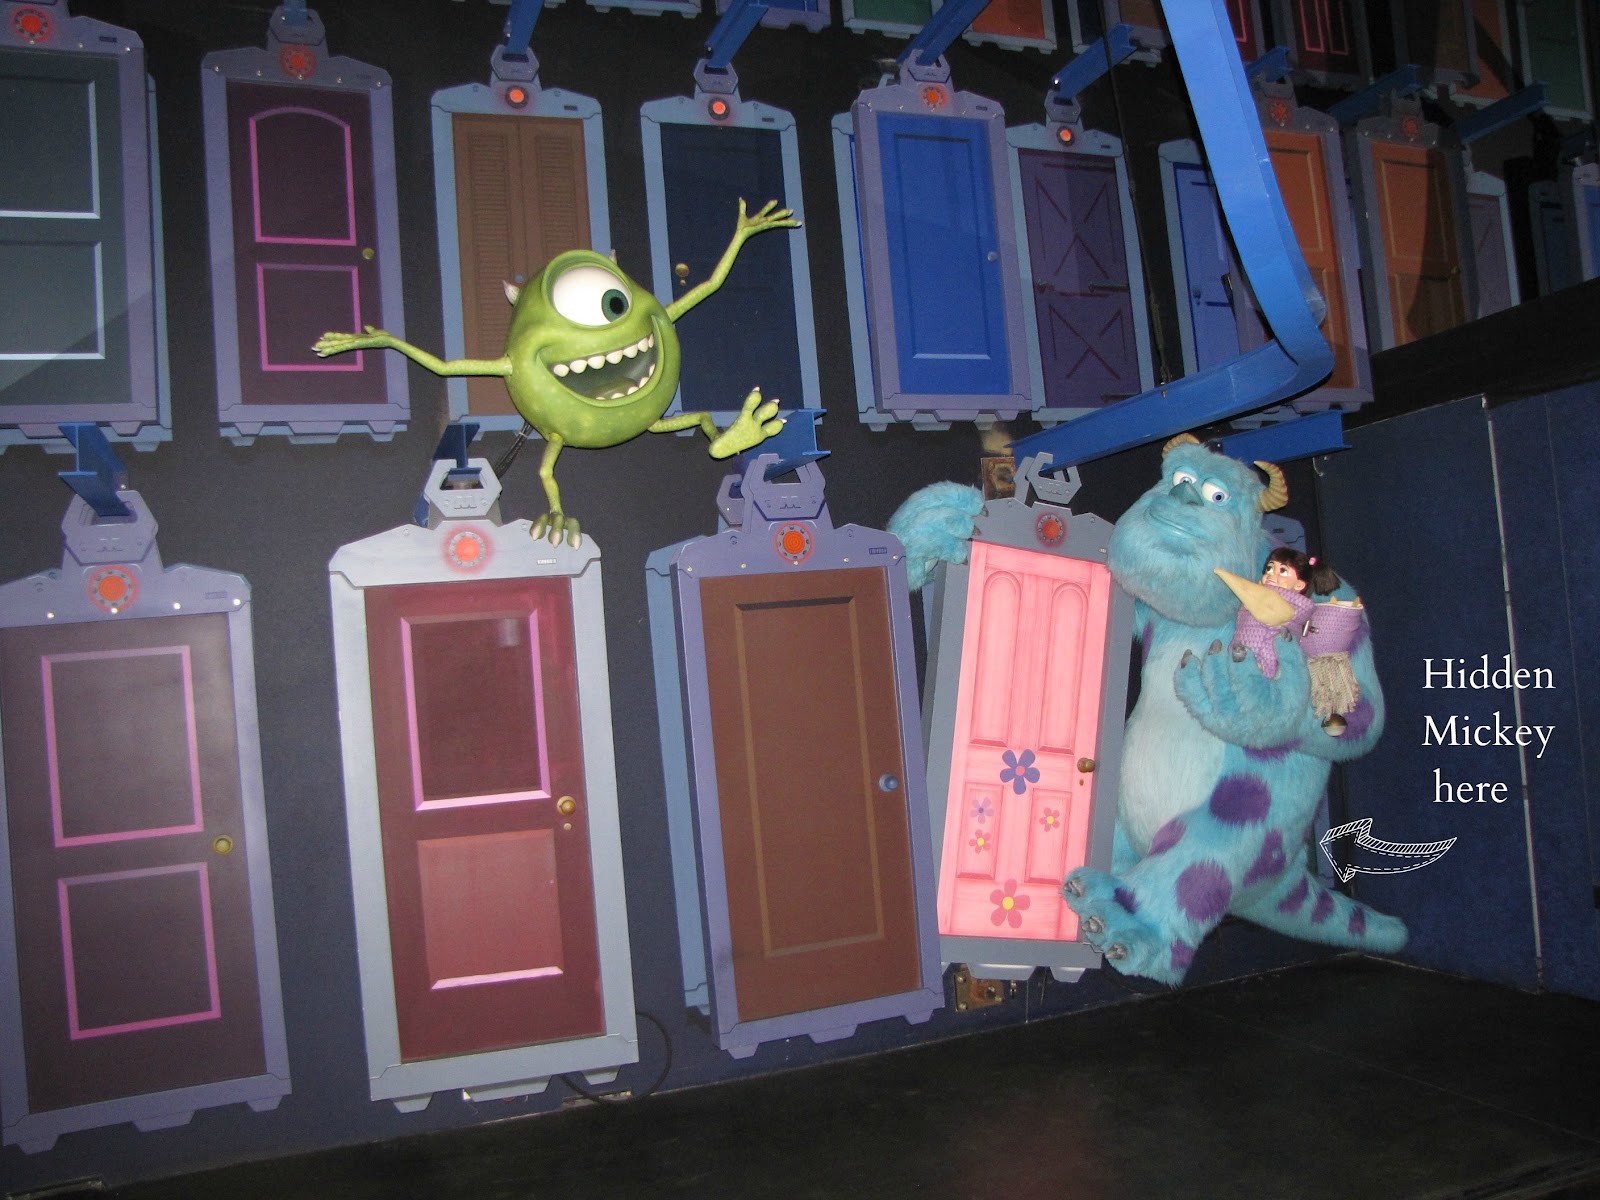 Monsters Inc Mike and Sulley to the Rescue Hollywood Land Disney